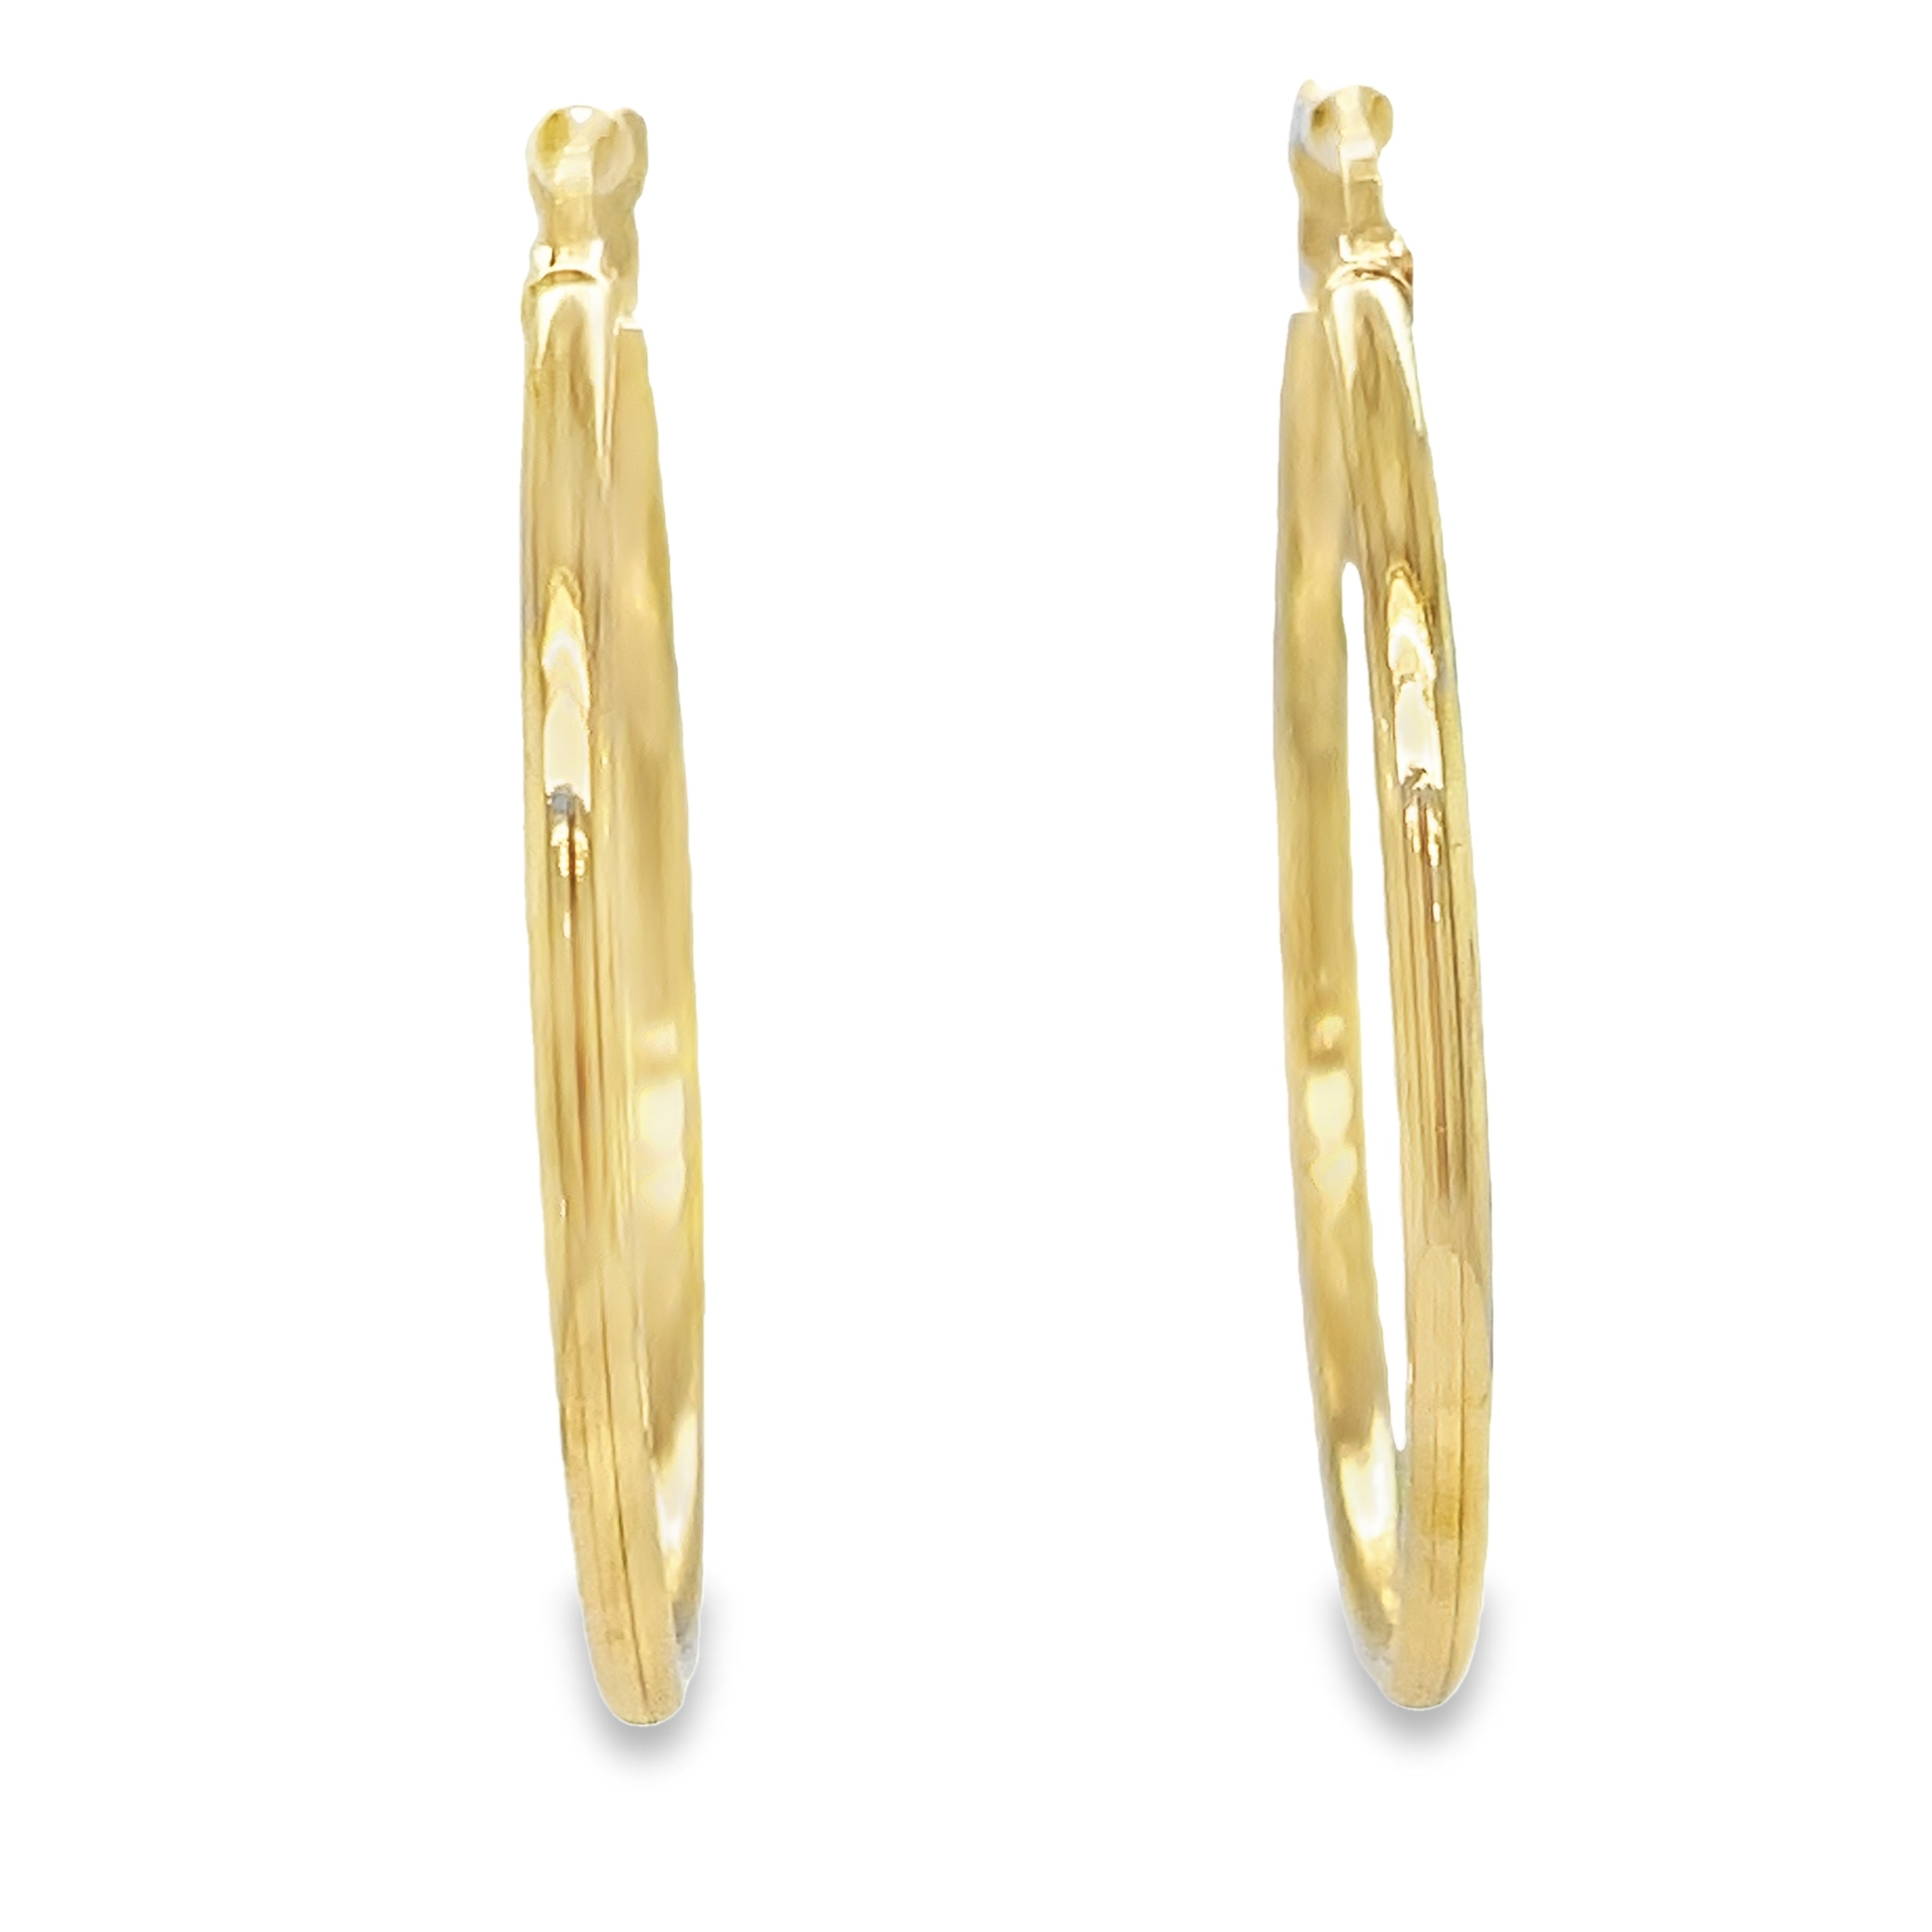 Experience elegance and style with our 14k Italian Yellow Gold Small Hoop Earrings! These beautiful earrings are crafted with 14k yellow gold and measure 2.00 mm thick. The secure lever system ensures they stay in place all day, making these 1-1/2" hoop earrings the perfect addition to any outfit. Elevate your look with these versatile and timeless earrings.